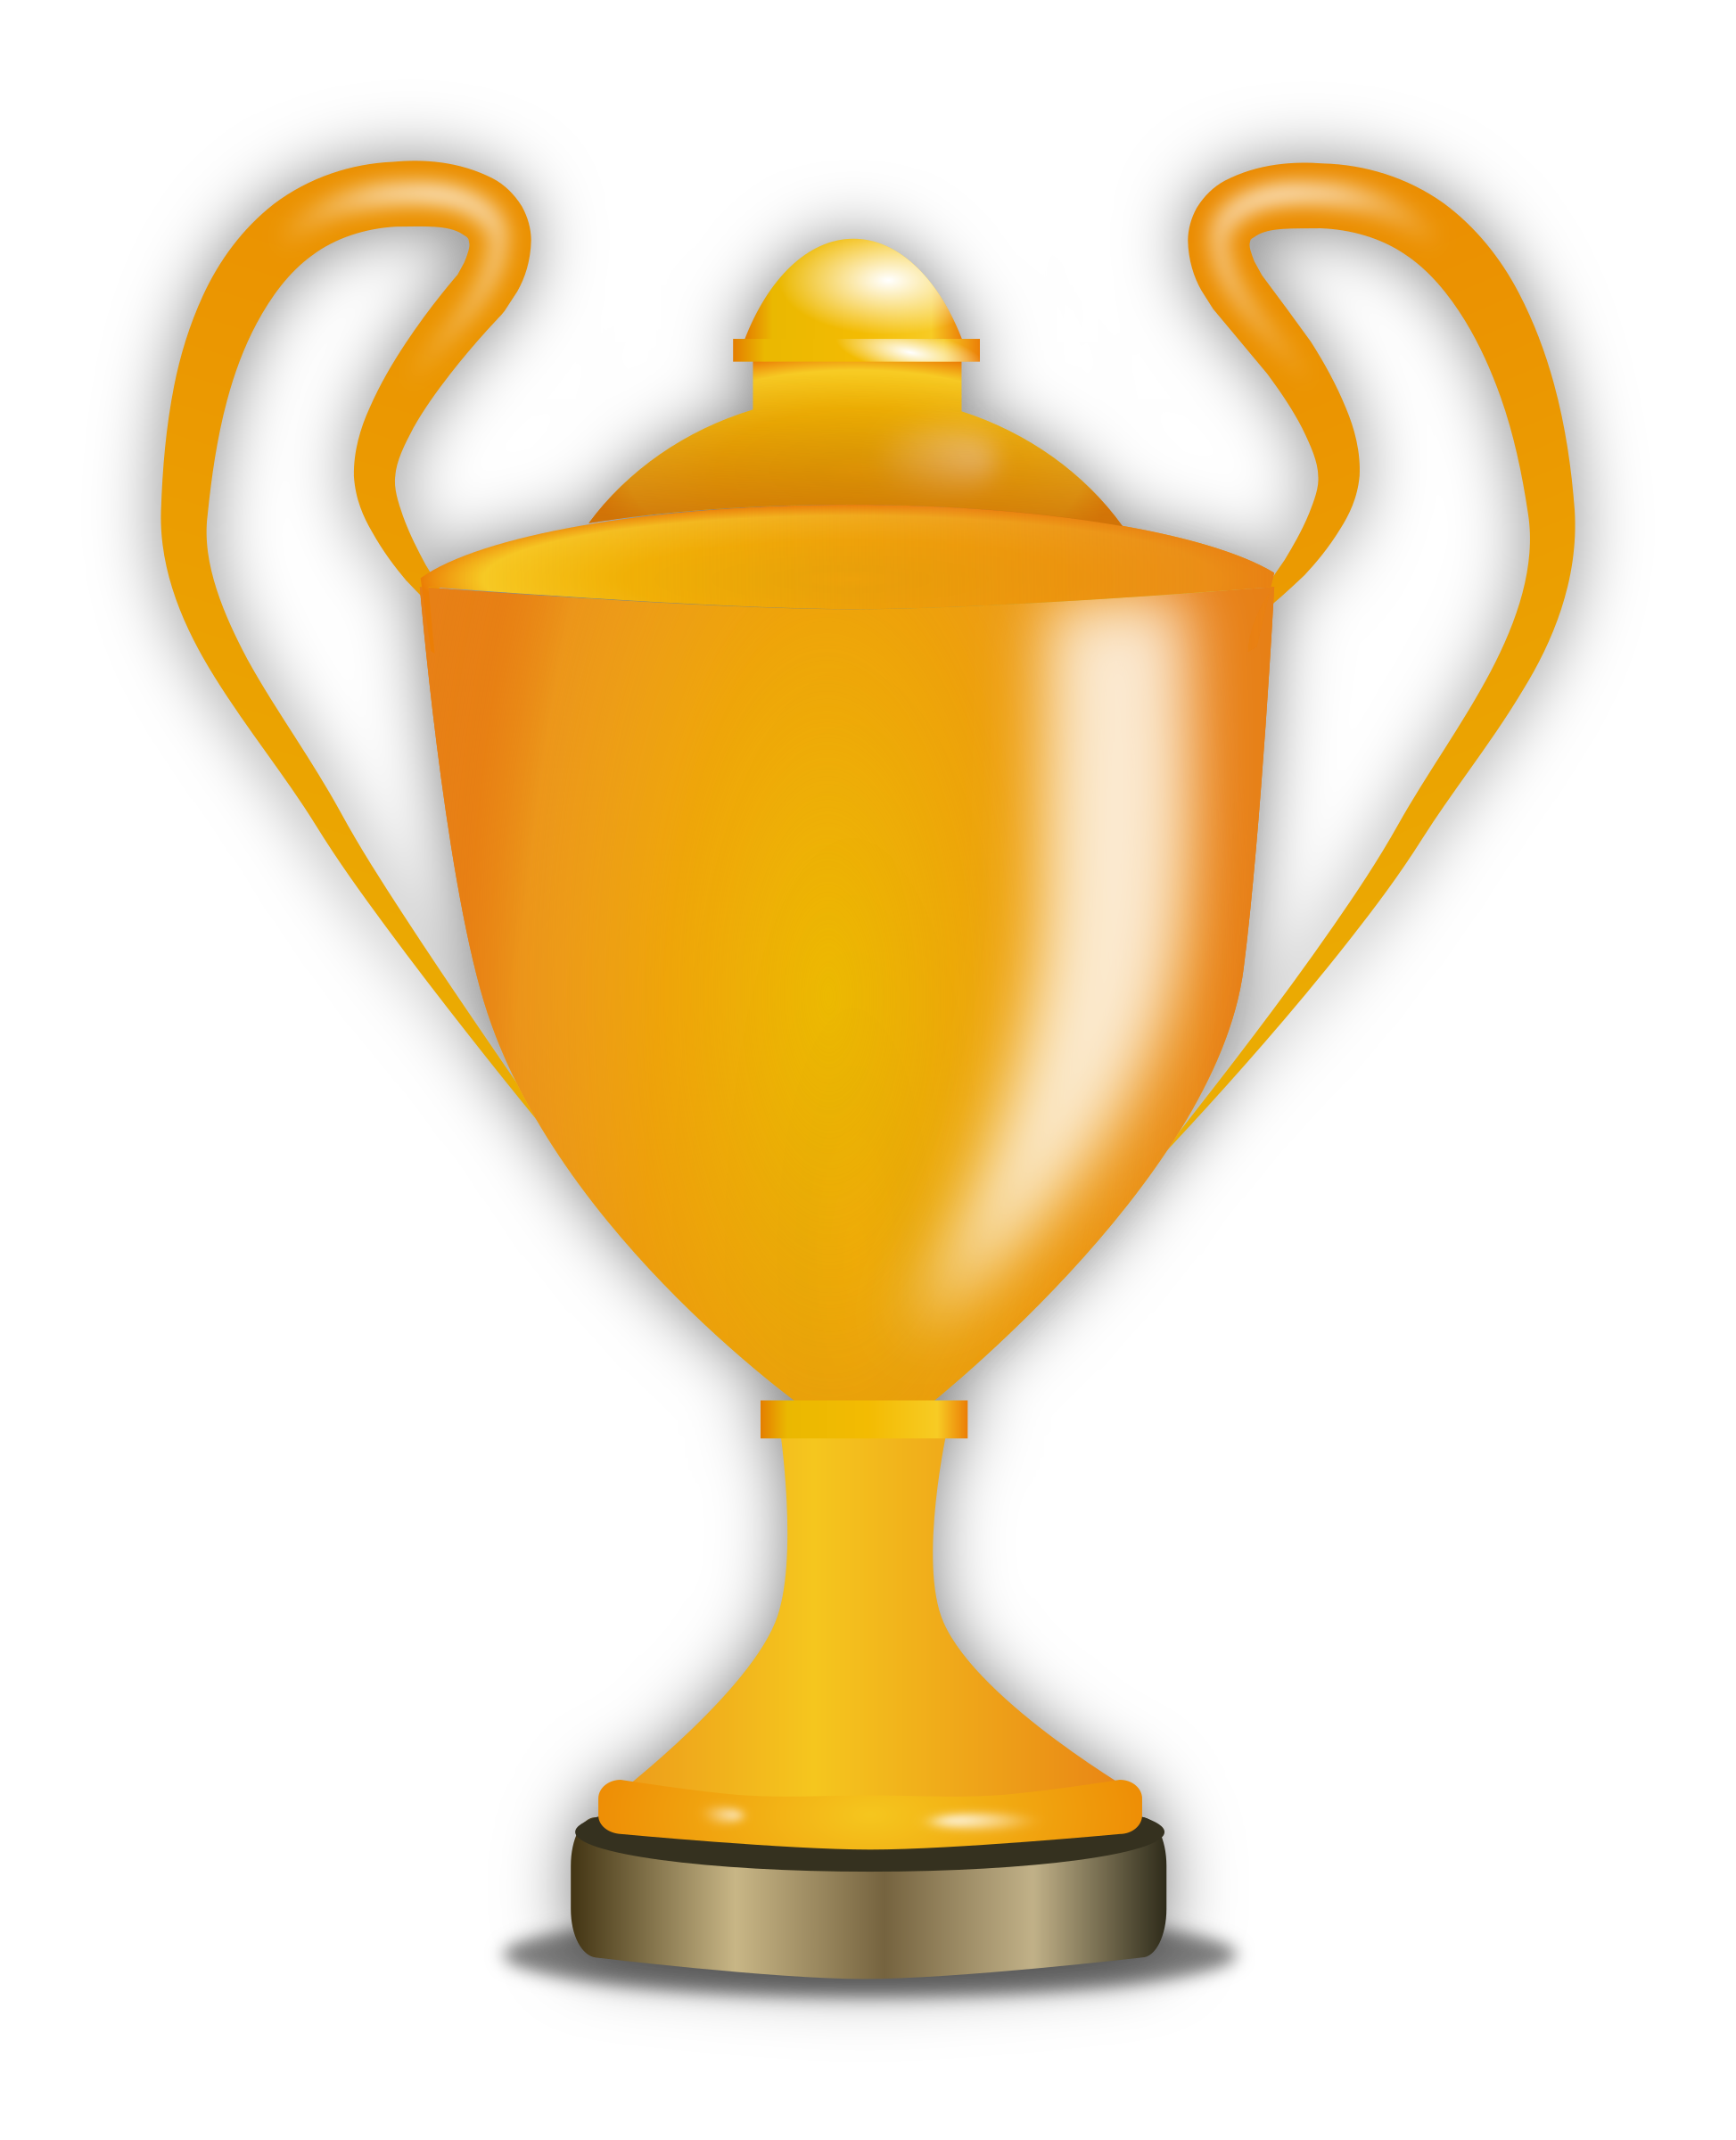 winners cup clipart - photo #35